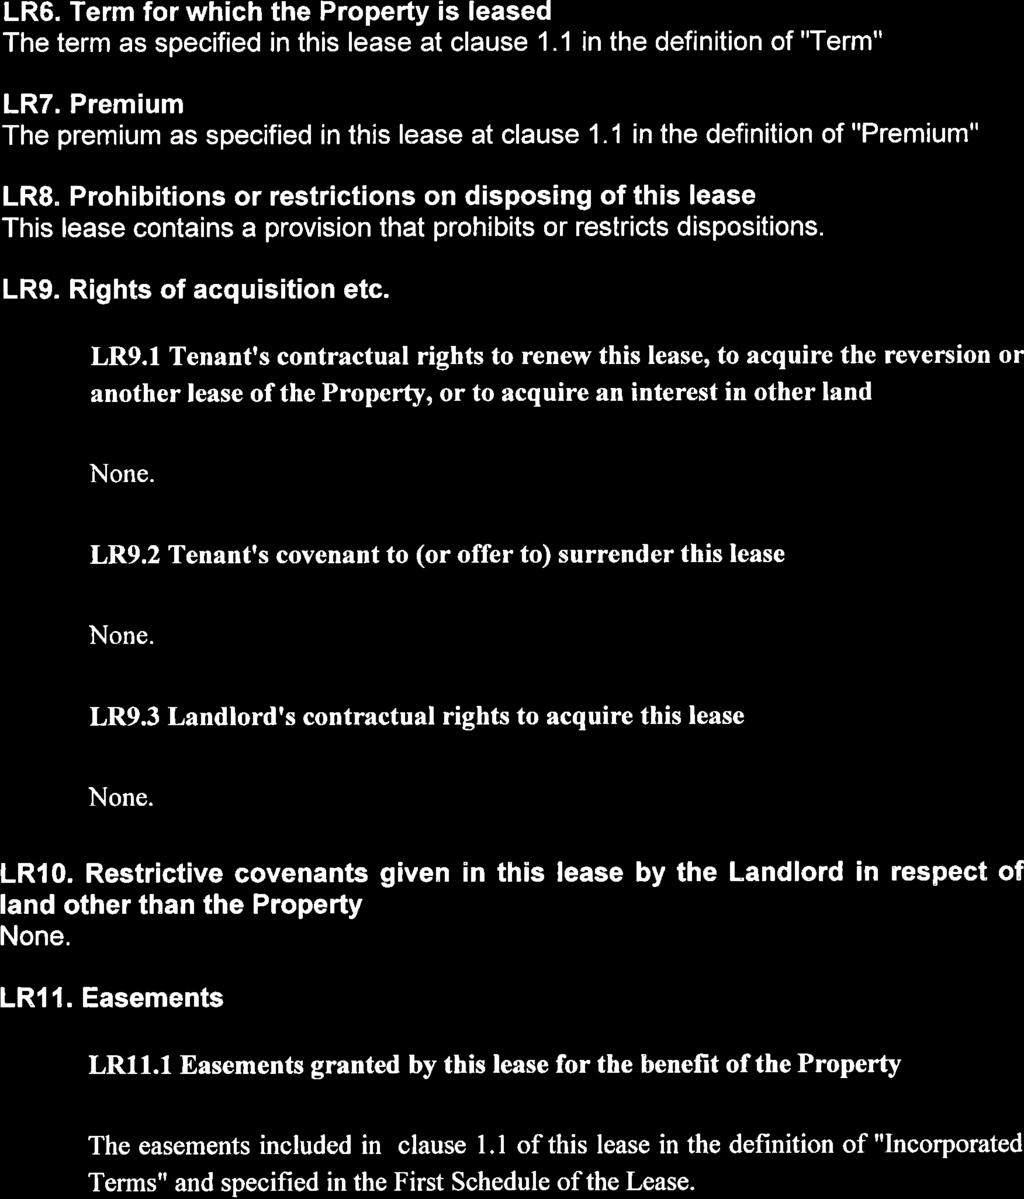 LR6. Term for which the Property is leased The term as specified in this lease at clause 1.1 in the definition of "Term". LR7. Premium The premium as specified in this lease at clause 1.